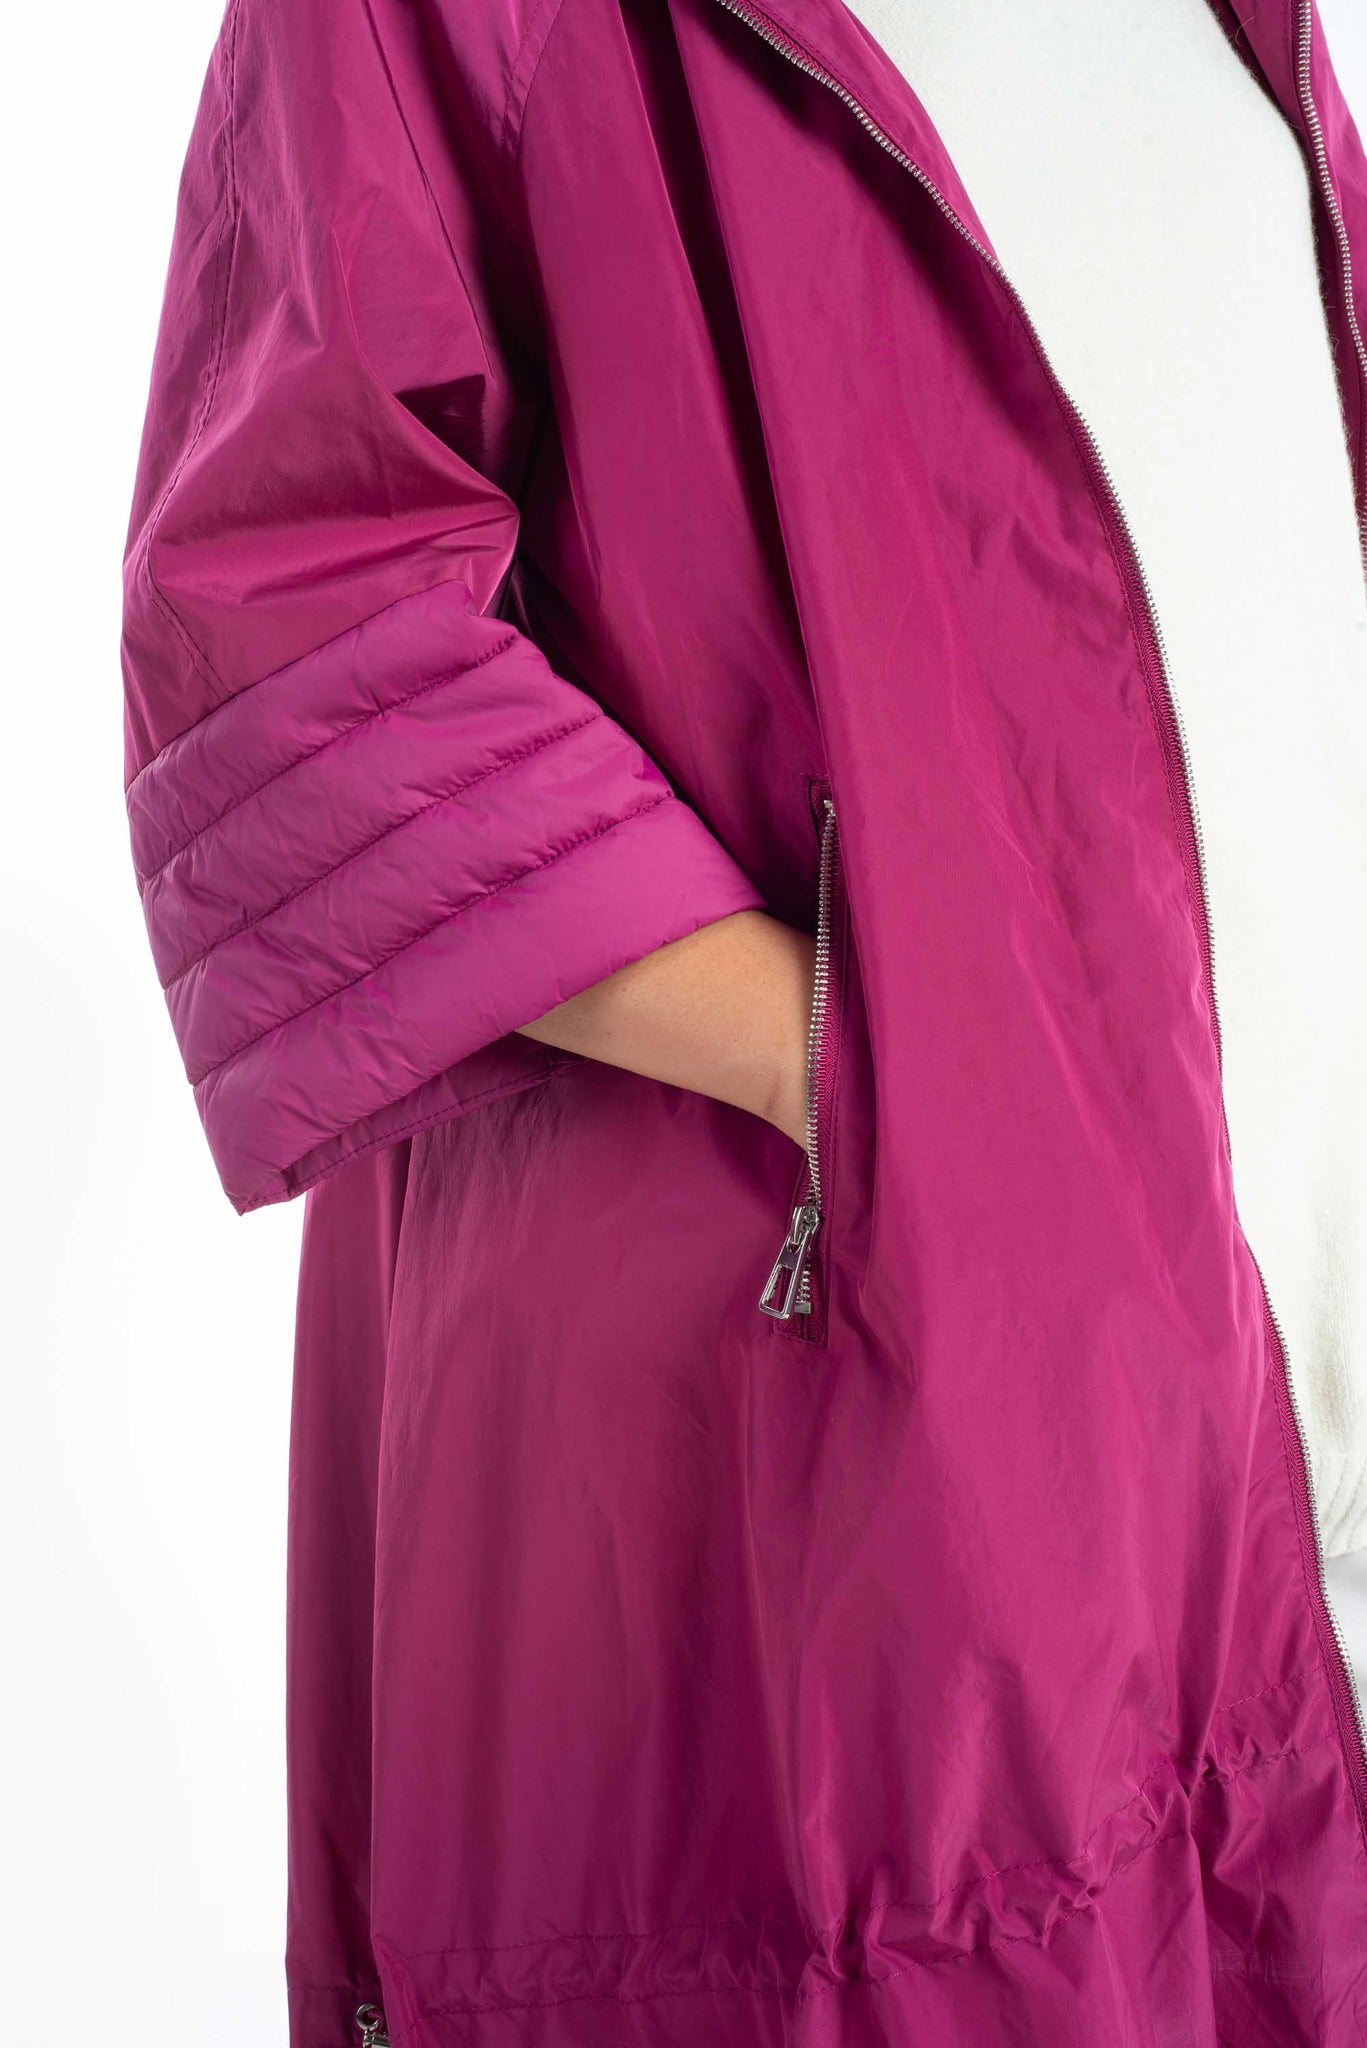 Duster coat in technical fabric